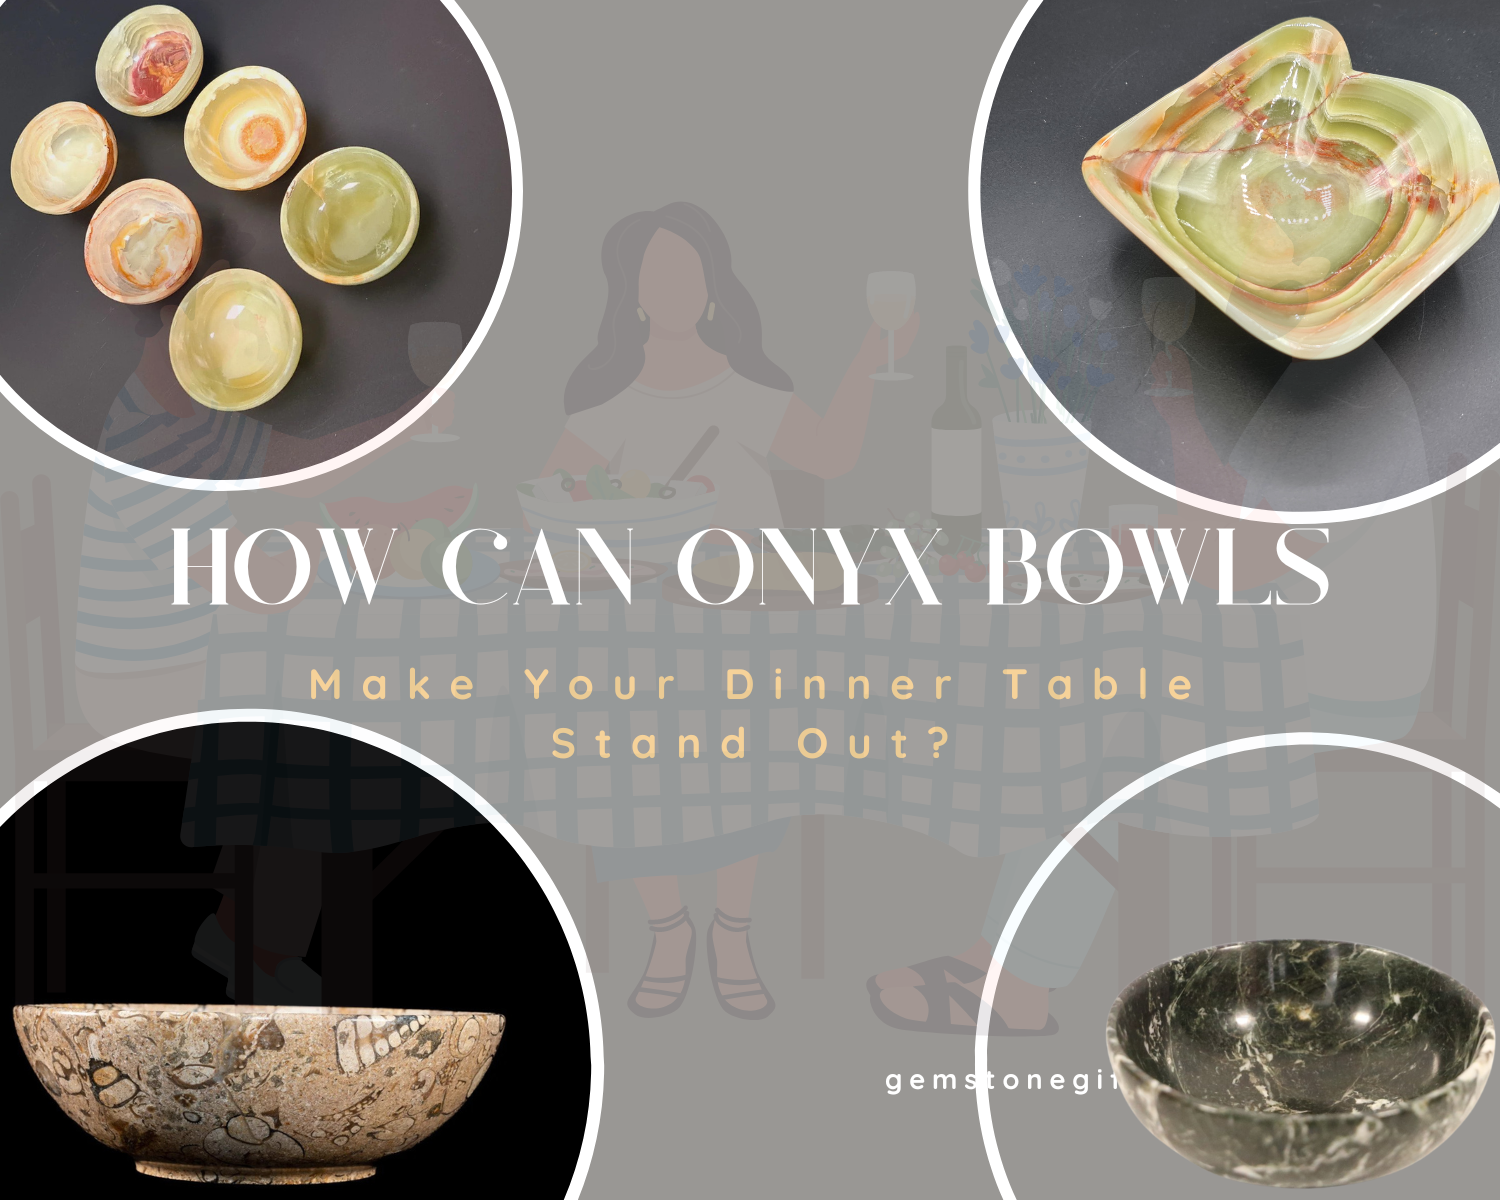 How Can Onyx Bowls Make Your Dinner Table Stand Out?